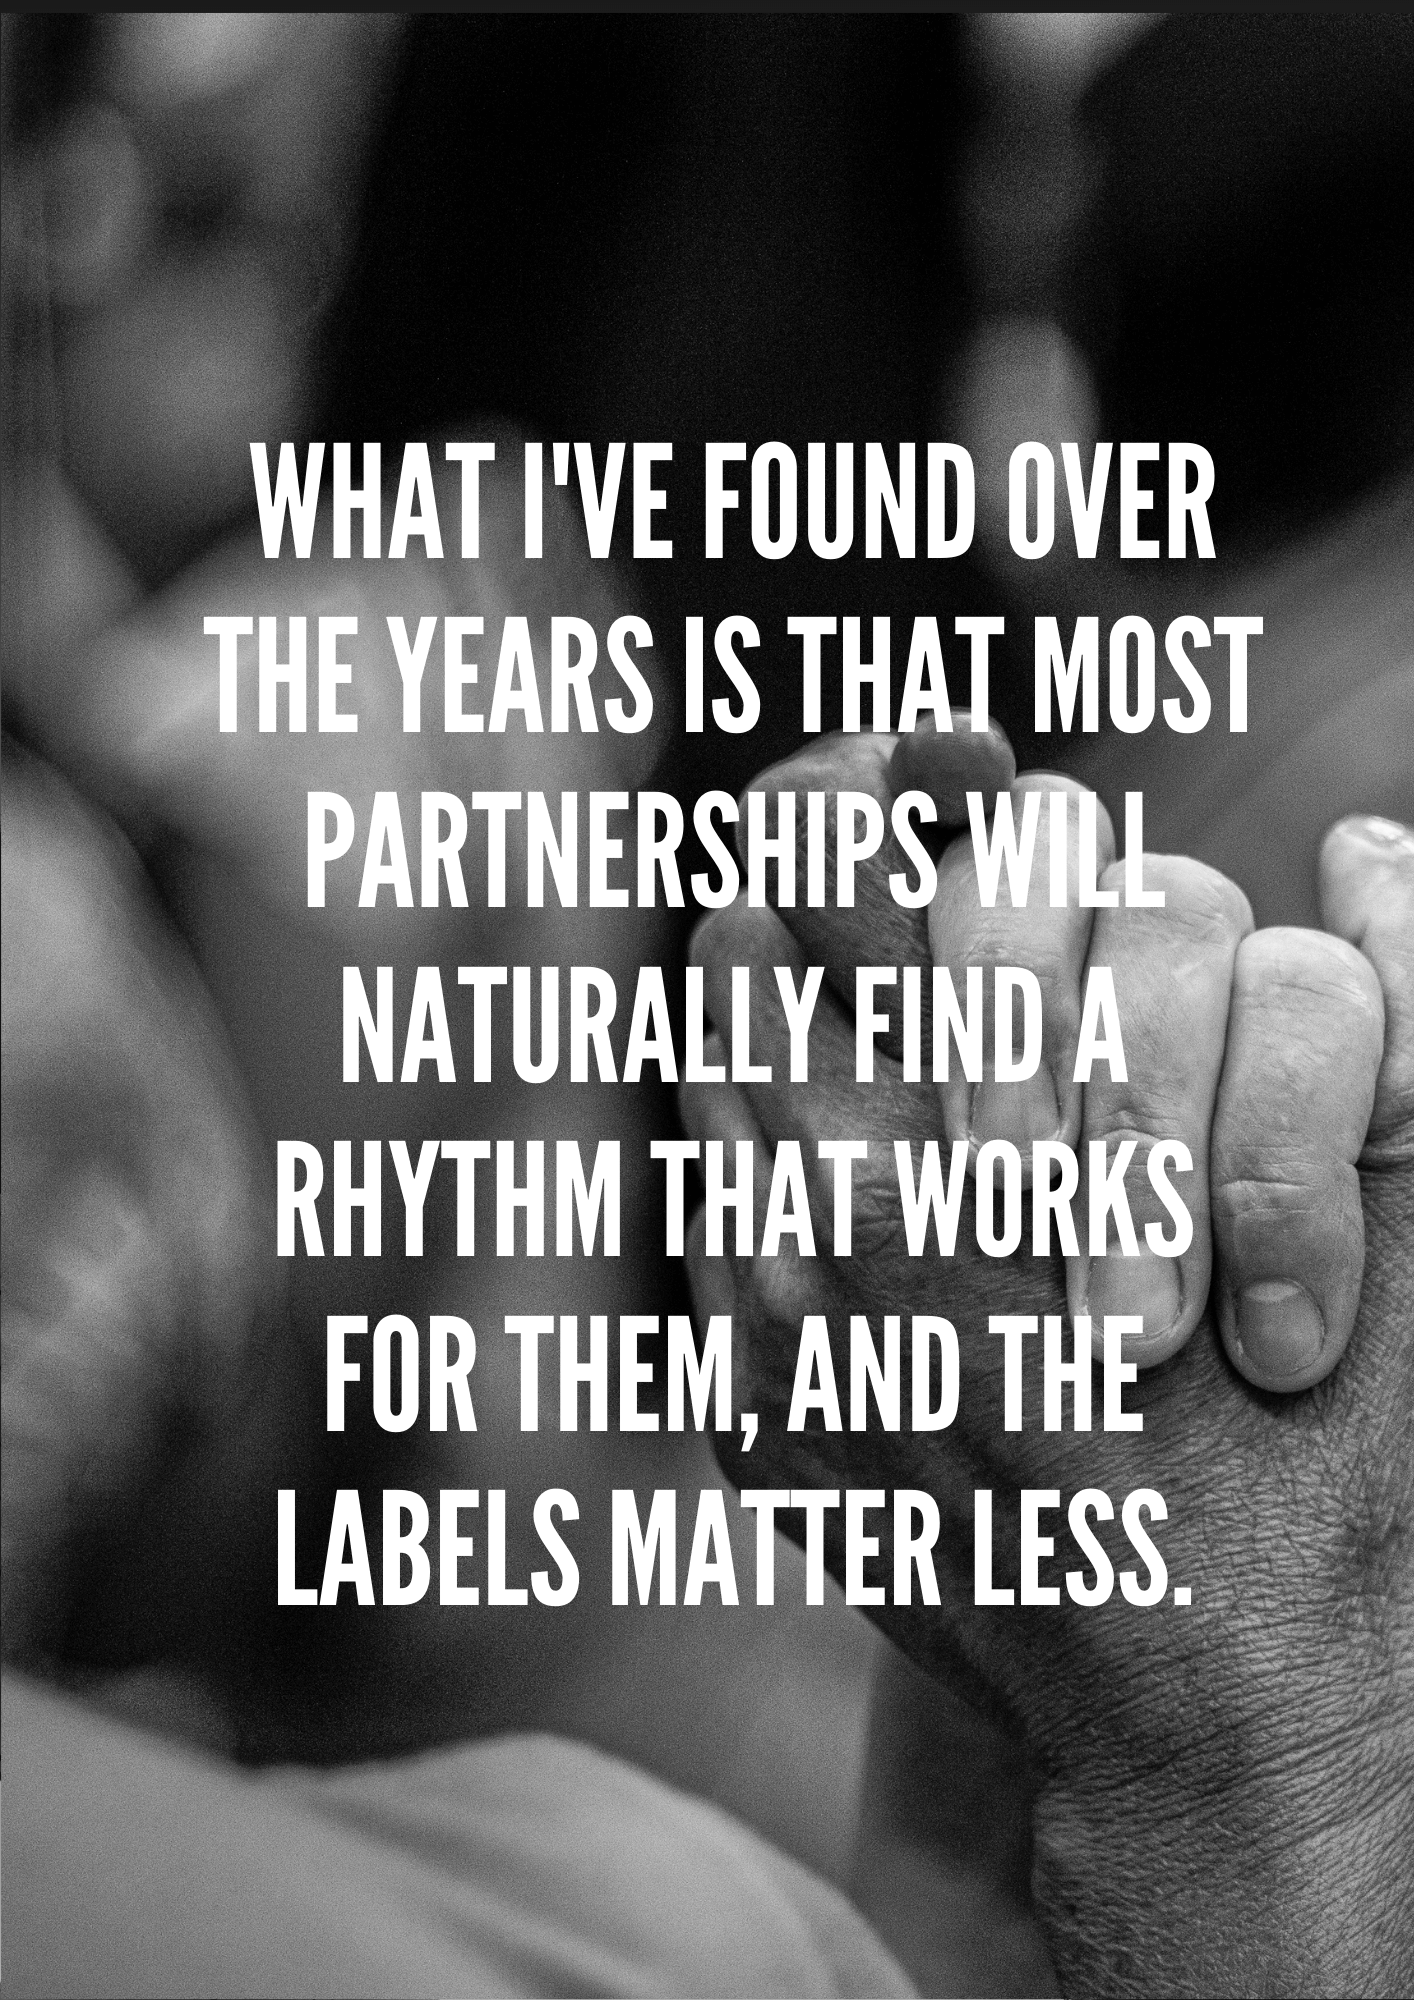 What I've found over the years is that most partnerships (no matter how many people are in the partnership) will naturally find a rhythm that works for them, and the labels matter less.